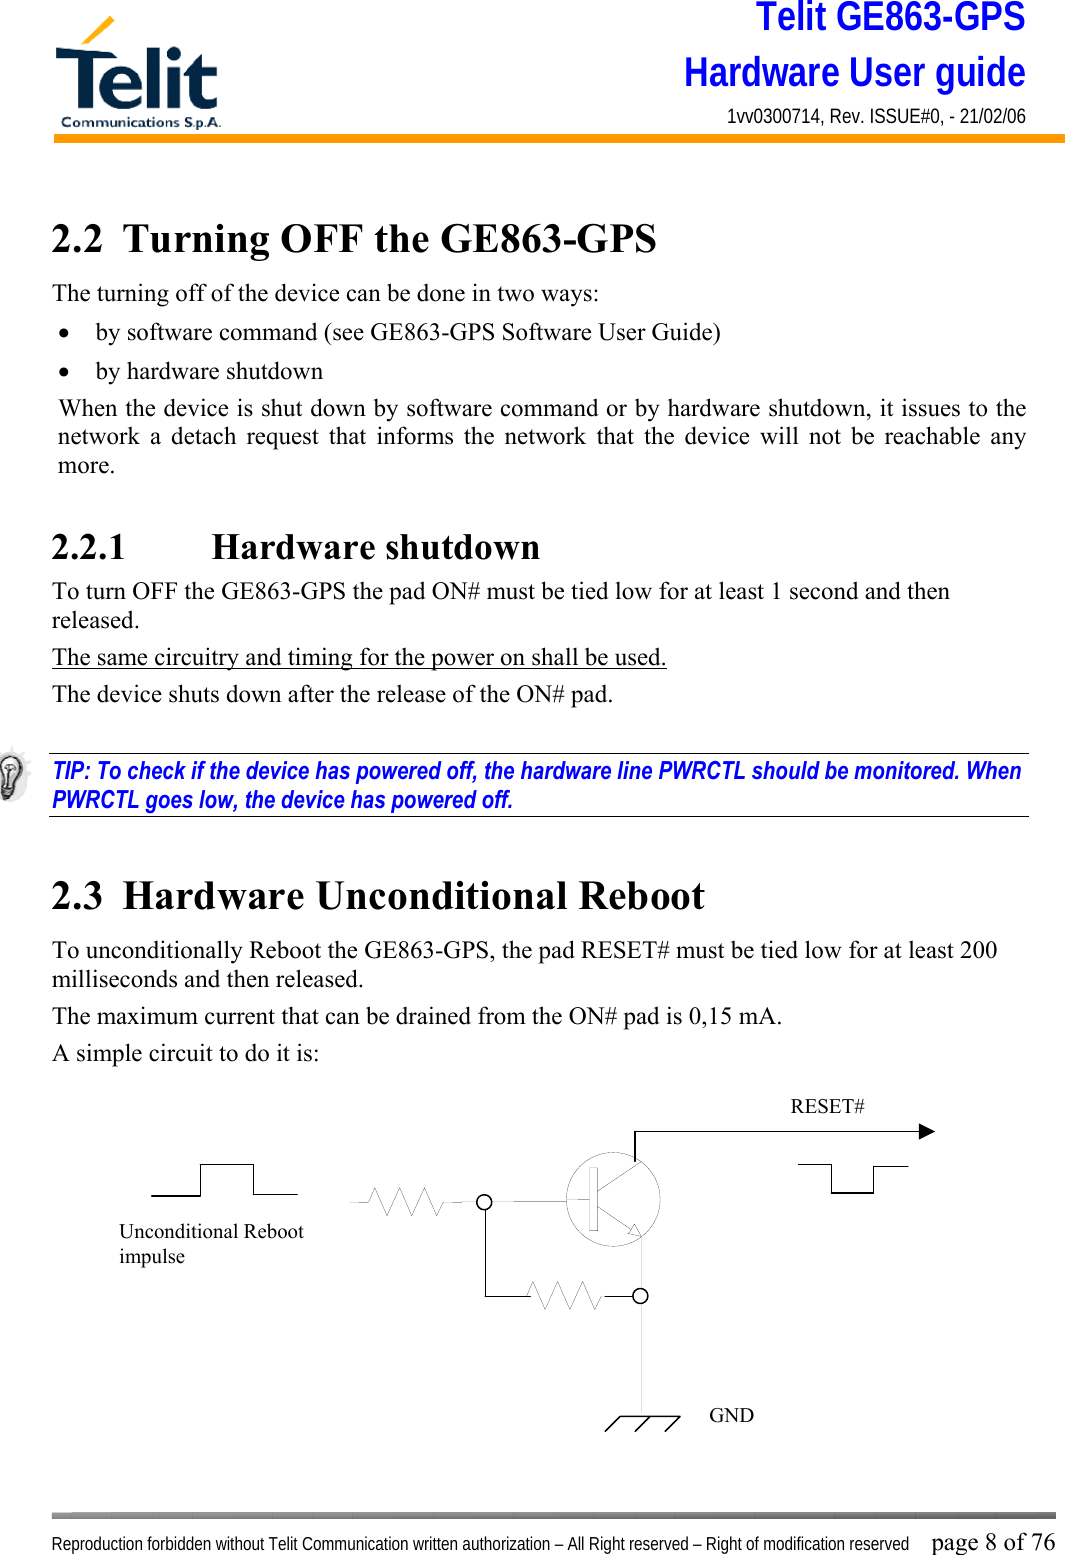 Telit GE863-GPS Hardware User guide 1vv0300714, Rev. ISSUE#0, - 21/02/06    Reproduction forbidden without Telit Communication written authorization – All Right reserved – Right of modification reserved page 8 of 76 2.2  Turning OFF the GE863-GPS The turning off of the device can be done in two ways: •  by software command (see GE863-GPS Software User Guide) •  by hardware shutdown When the device is shut down by software command or by hardware shutdown, it issues to the network a detach request that informs the network that the device will not be reachable any more.   2.2.1    Hardware shutdown To turn OFF the GE863-GPS the pad ON# must be tied low for at least 1 second and then released. The same circuitry and timing for the power on shall be used. The device shuts down after the release of the ON# pad.  TIP: To check if the device has powered off, the hardware line PWRCTL should be monitored. When PWRCTL goes low, the device has powered off.  2.3  Hardware Unconditional Reboot To unconditionally Reboot the GE863-GPS, the pad RESET# must be tied low for at least 200 milliseconds and then released. The maximum current that can be drained from the ON# pad is 0,15 mA. A simple circuit to do it is:              RESET# Unconditional Reboot impulse   GND